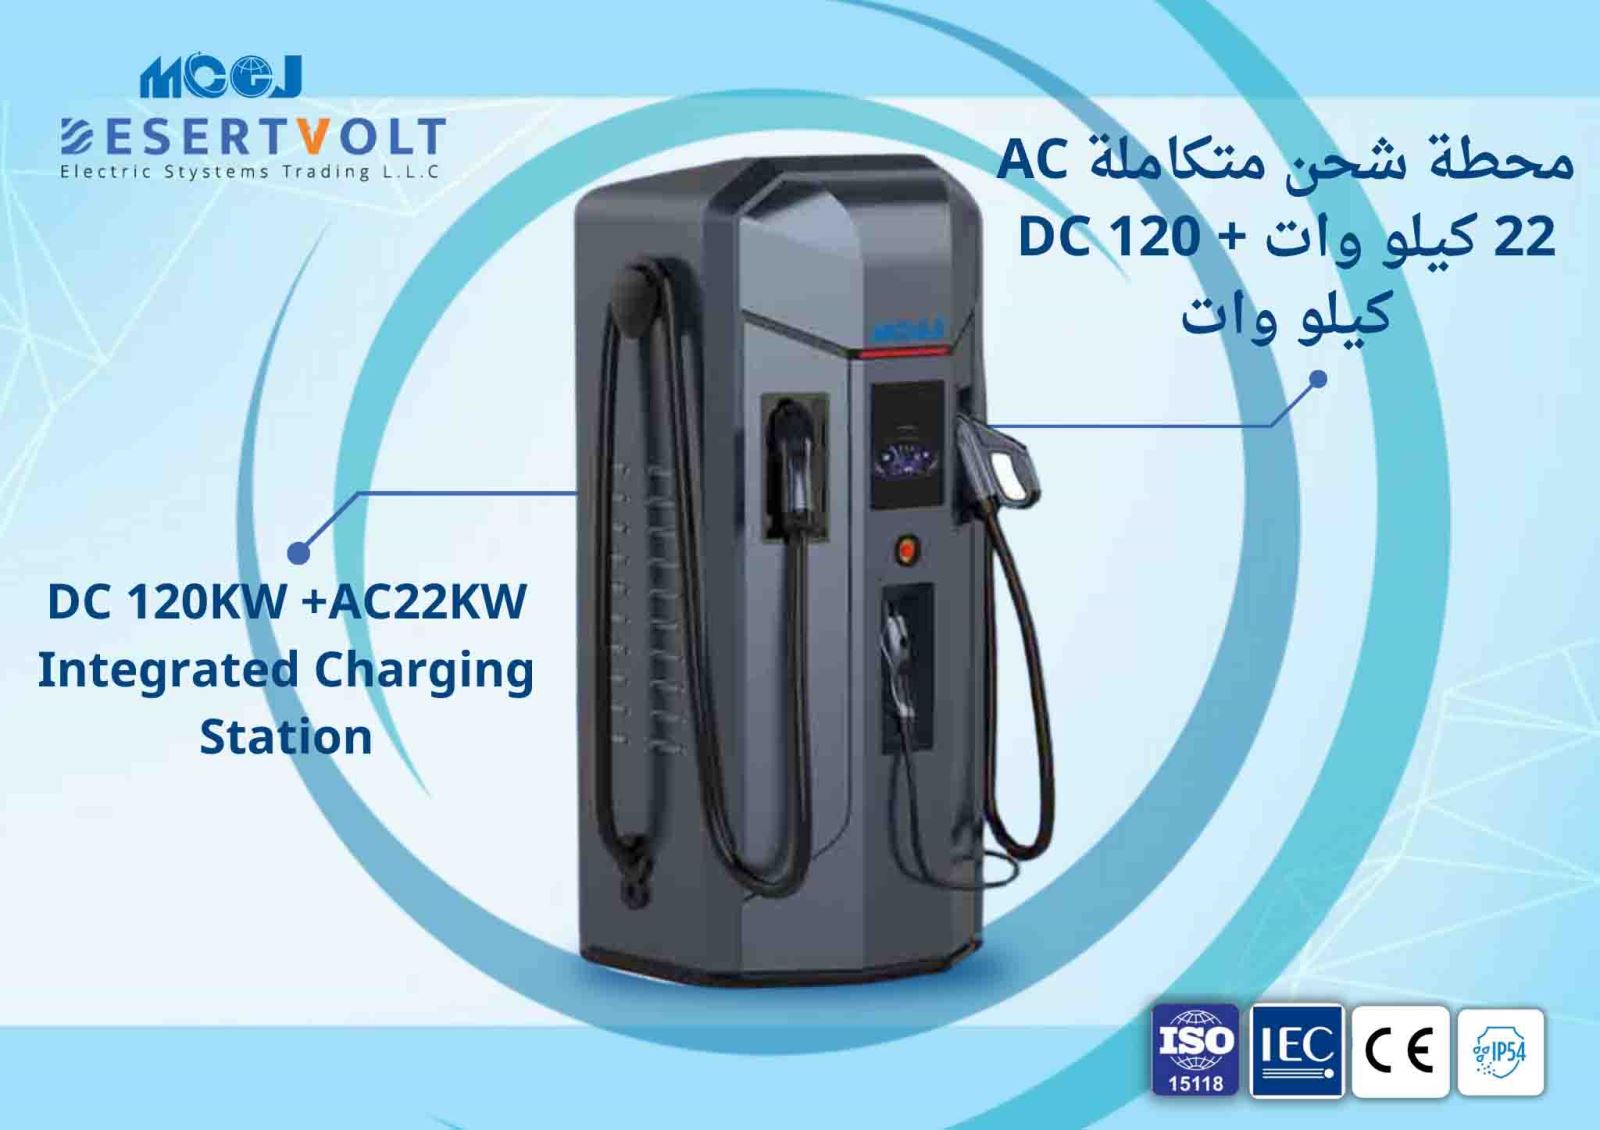 DC 120KW +AC22KW Integrated Charging Station